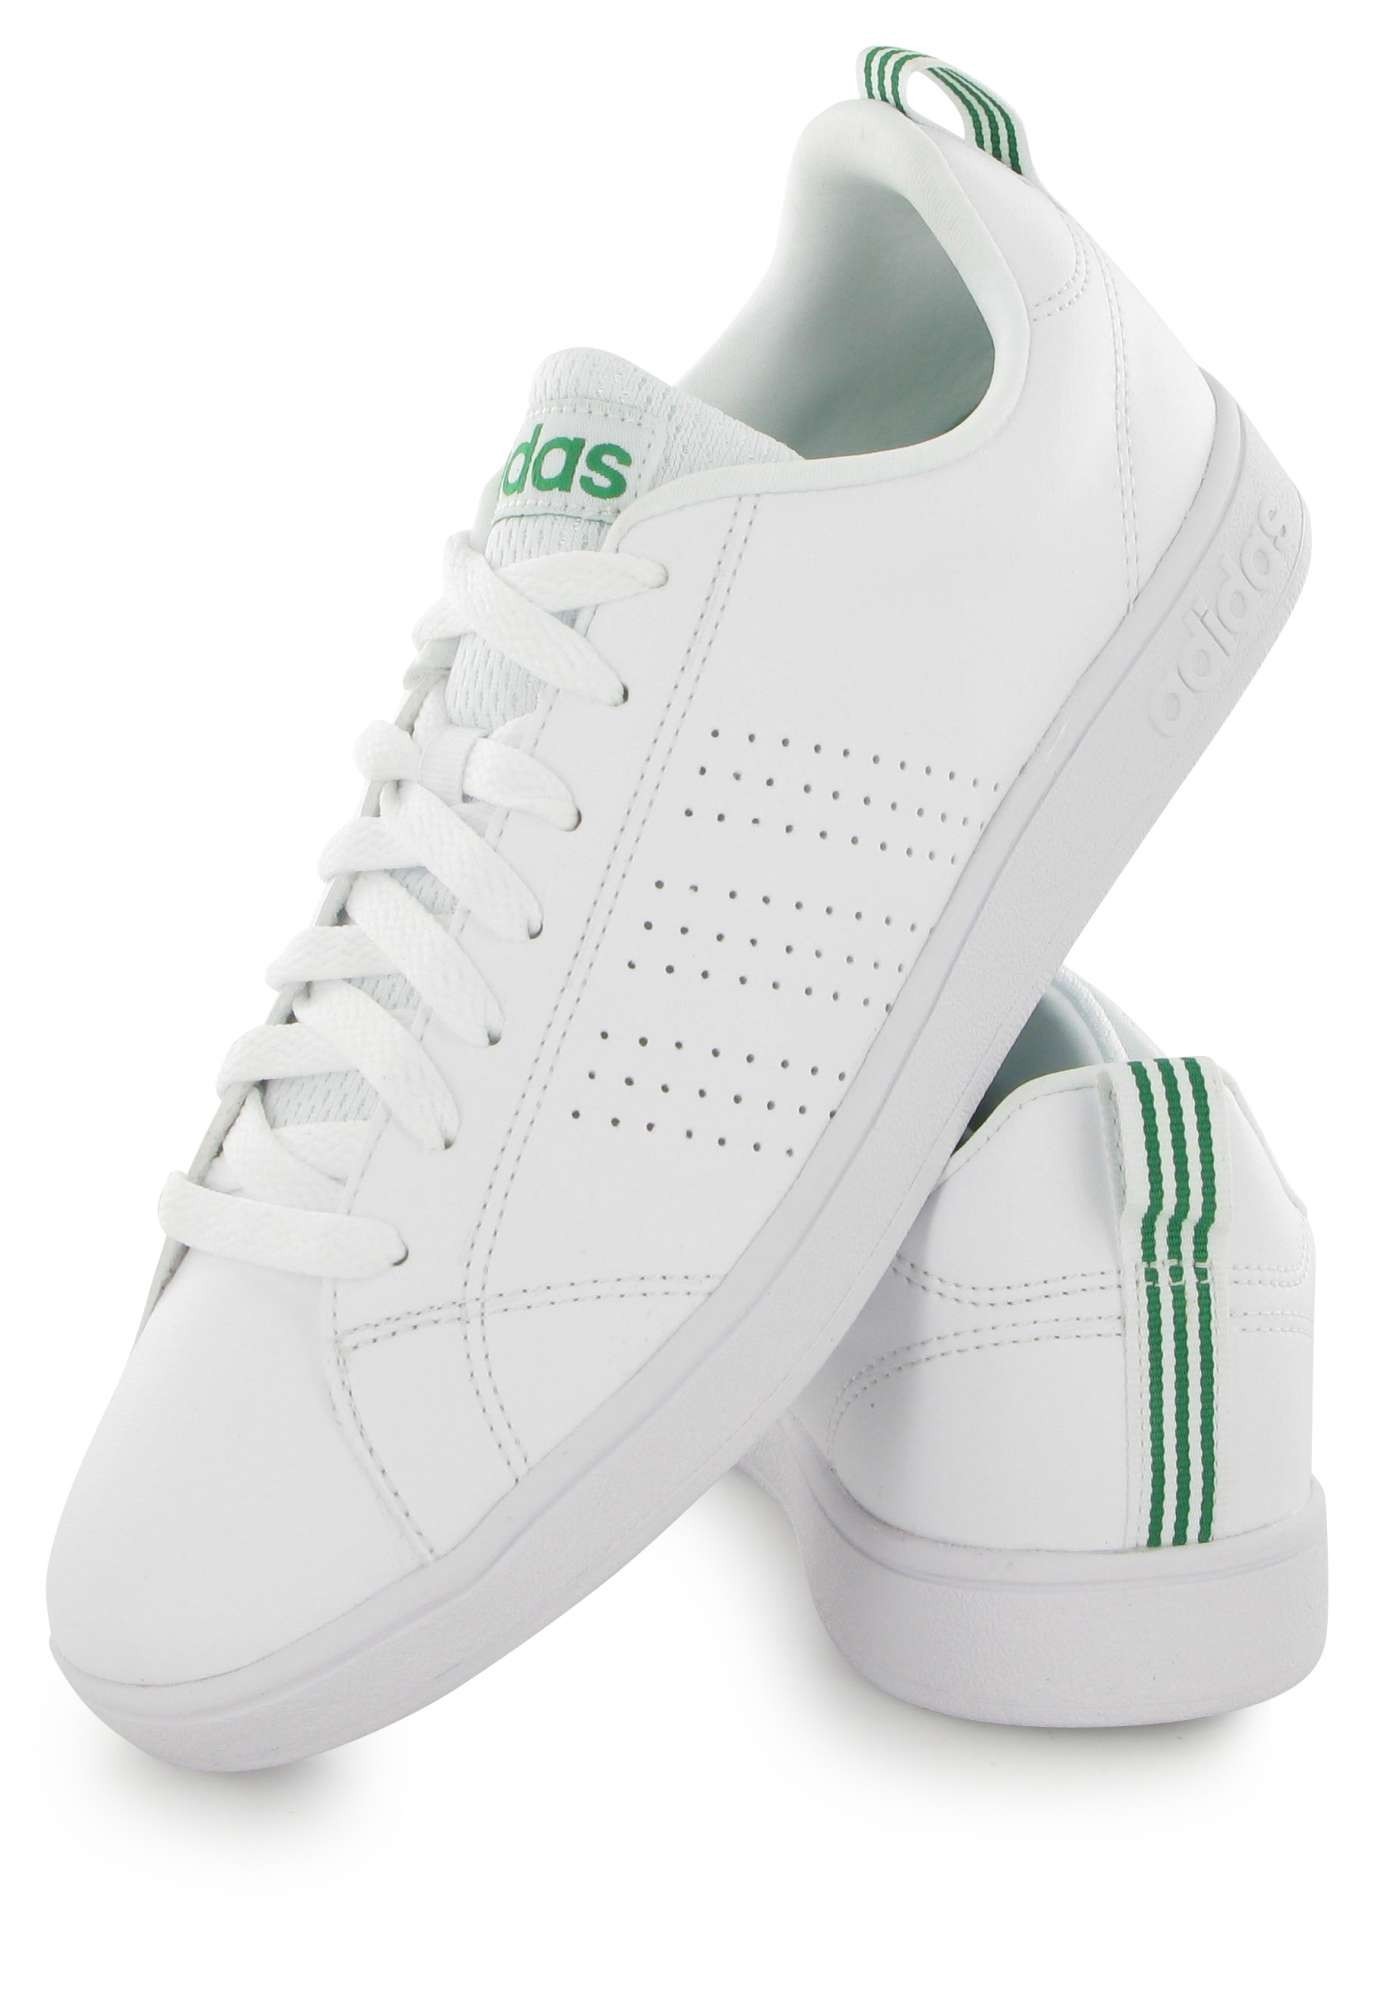 adidas neo homme blanc Cheaper Than Retail Price> Buy Clothing ...